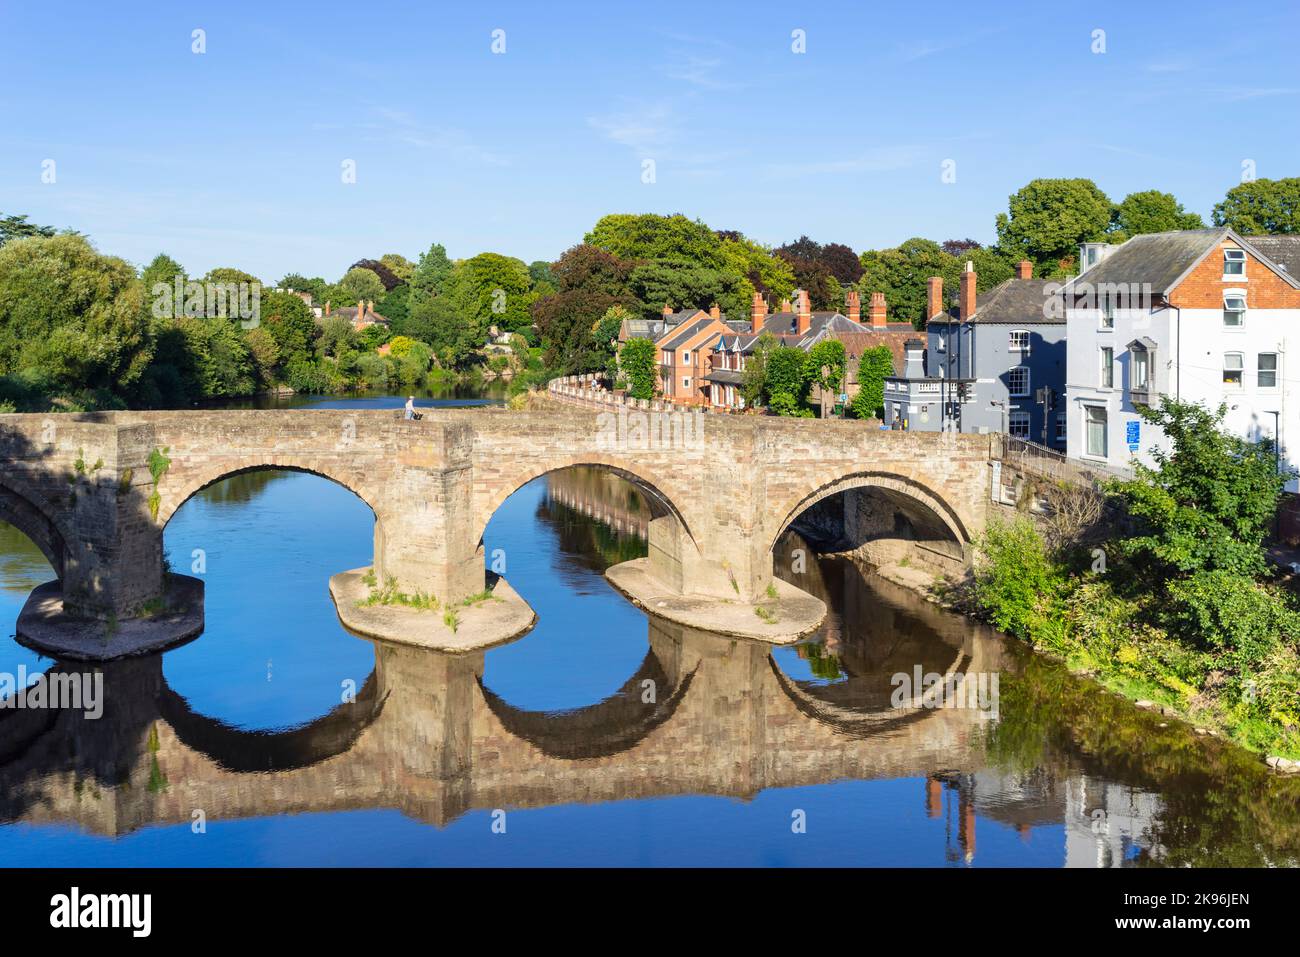 Hereford River Wye Reflections of the Old Bridge St martins st across the River Wye in Hereford Herefordshire England GB Europa Stockfoto